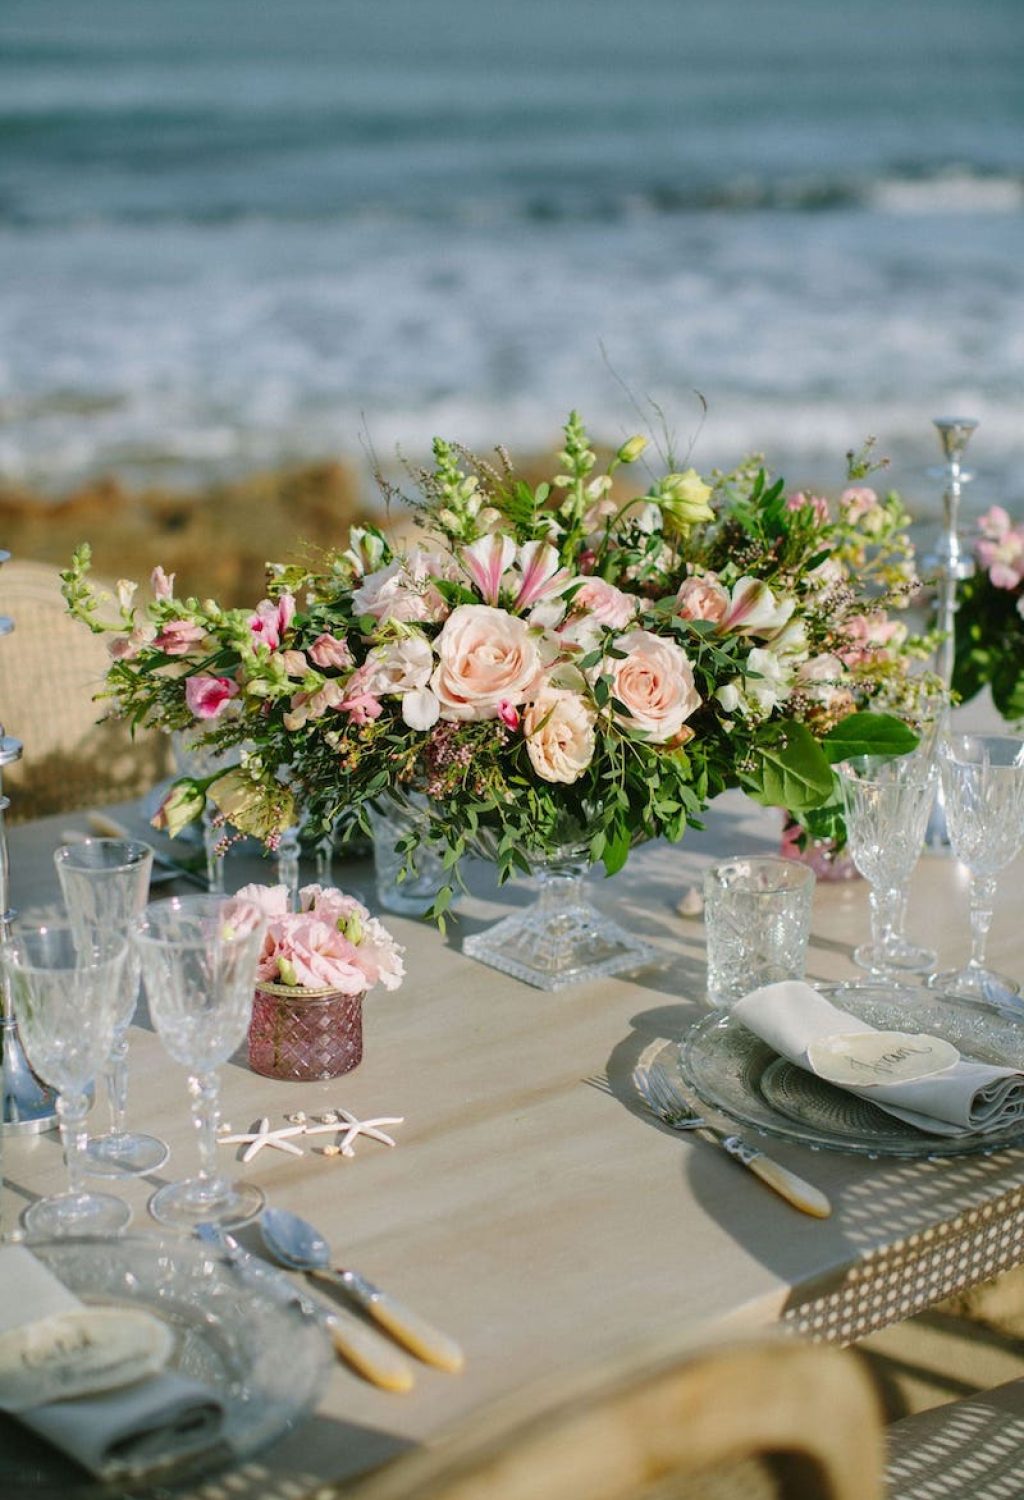 Setting table for wedding in Mallorca